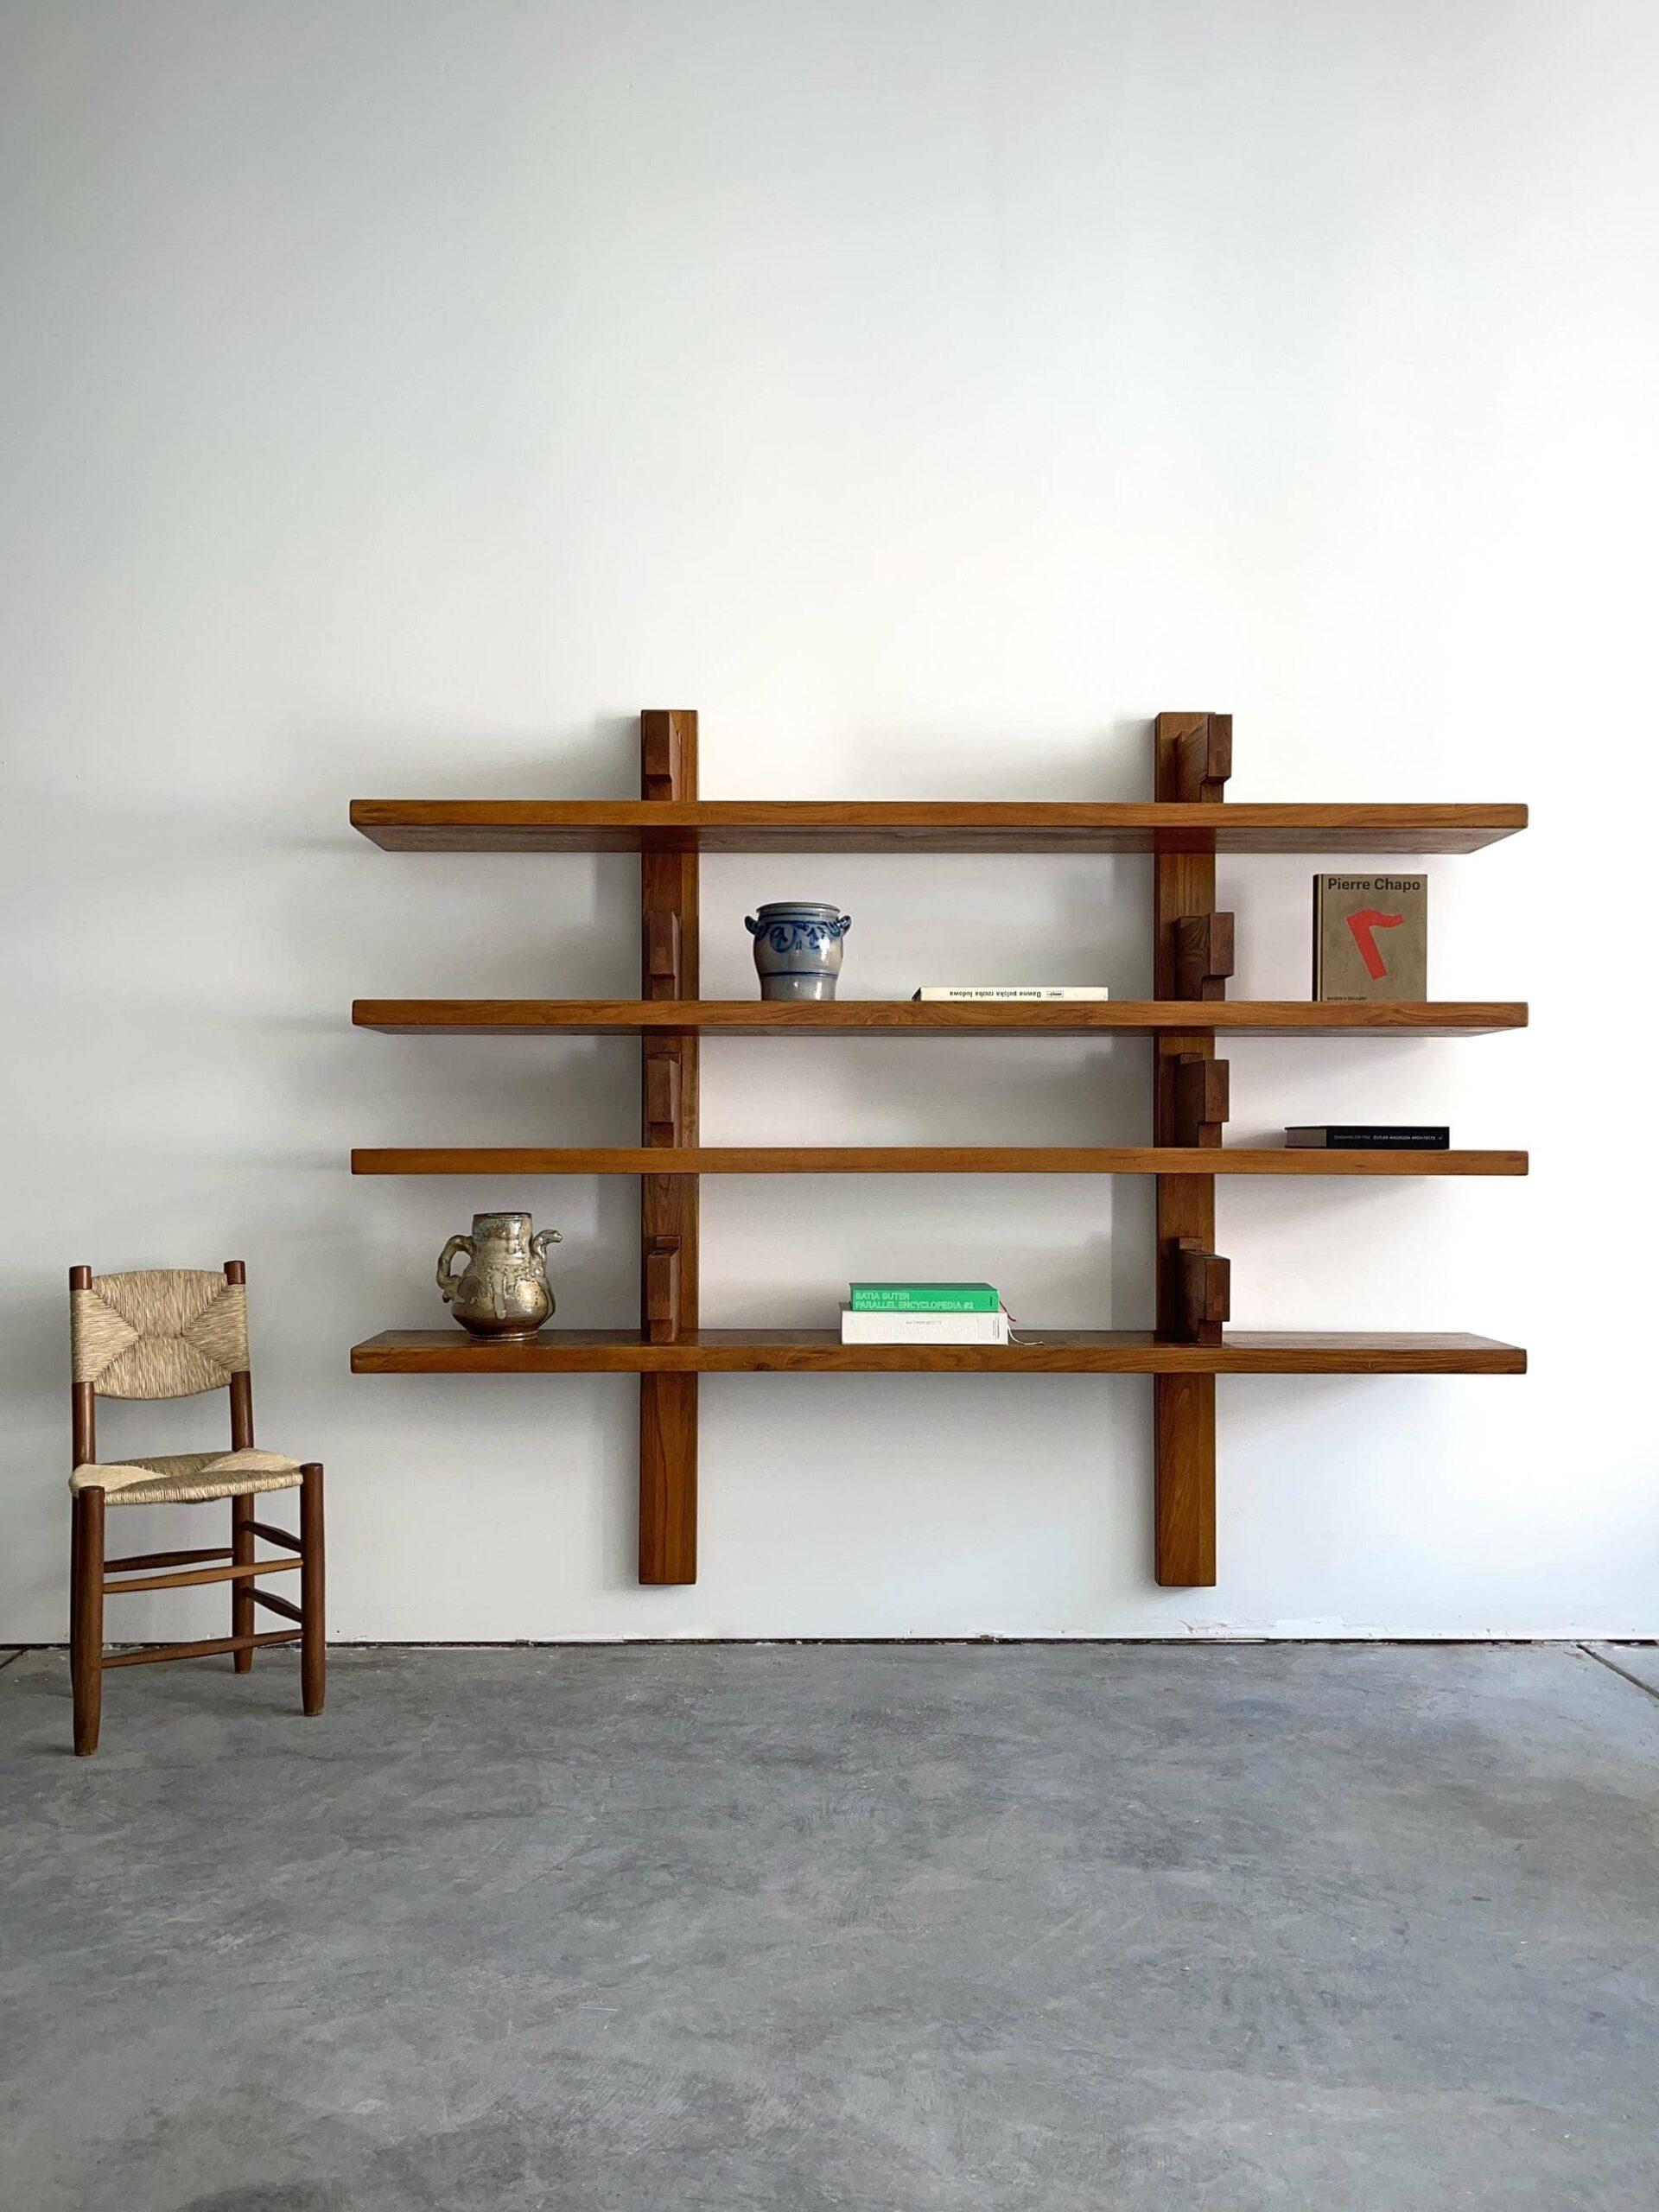 An instantly recognizable Pierre Chapo wall hanging bookshelf consists of 4 horizontal solid elm slats that rests under 8 brackets. Chapo playfully turned this around and put the brackets on top, fixing the construction with elm wedges. This way the